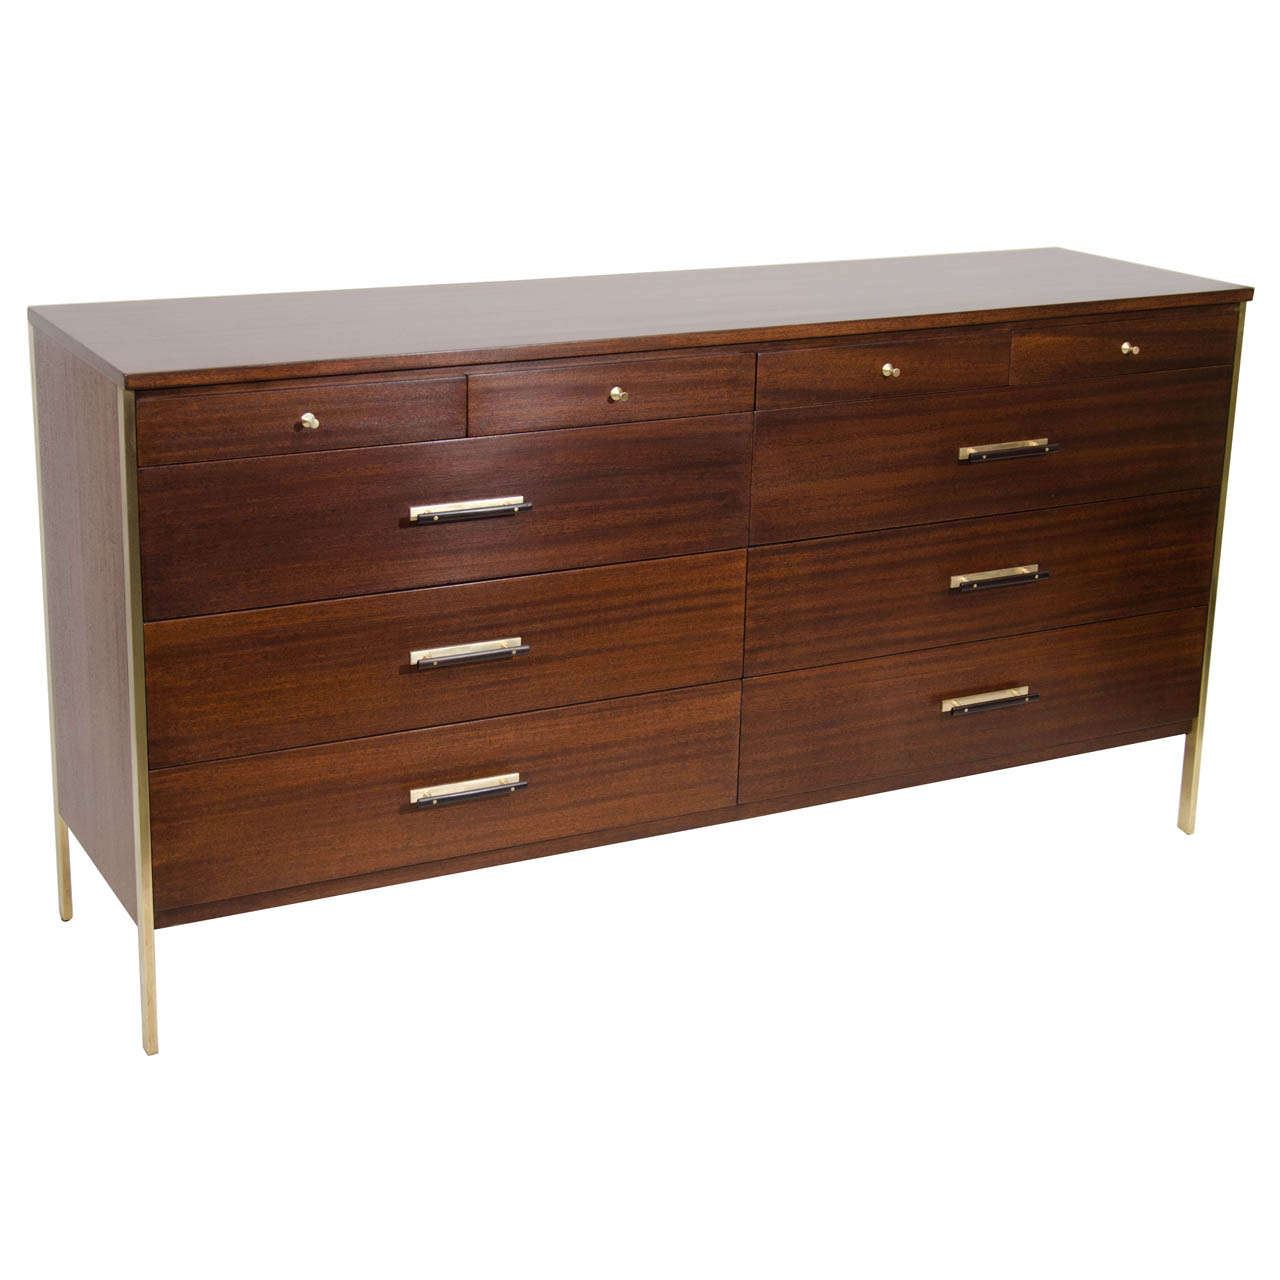 Paul McCobb Dresser for the Calvin Group Collection